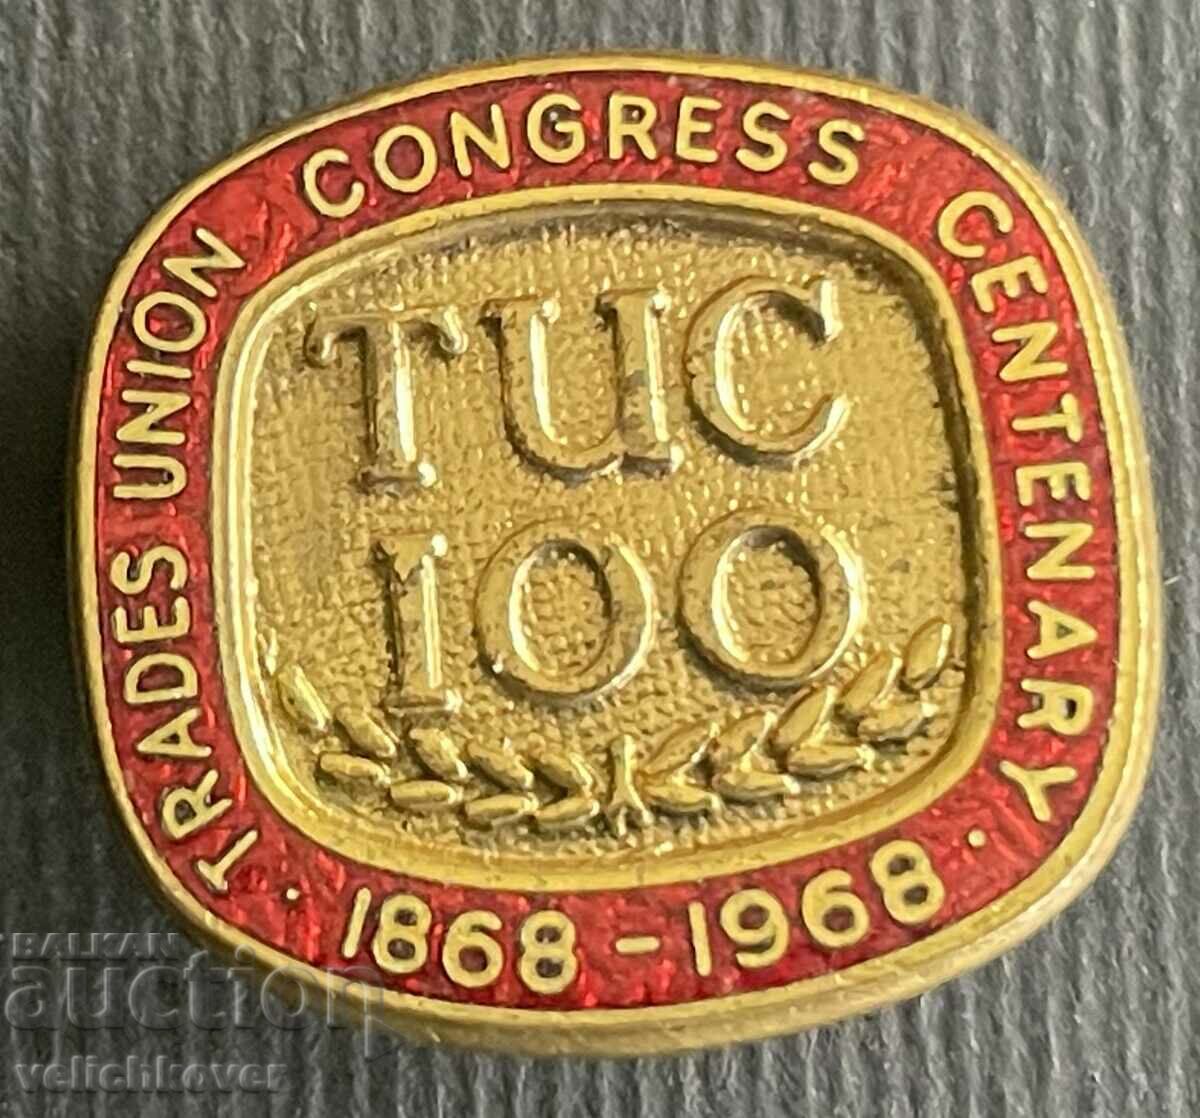 36042 Great Britain sign 100 years. Trade unions 1868-1968. Email